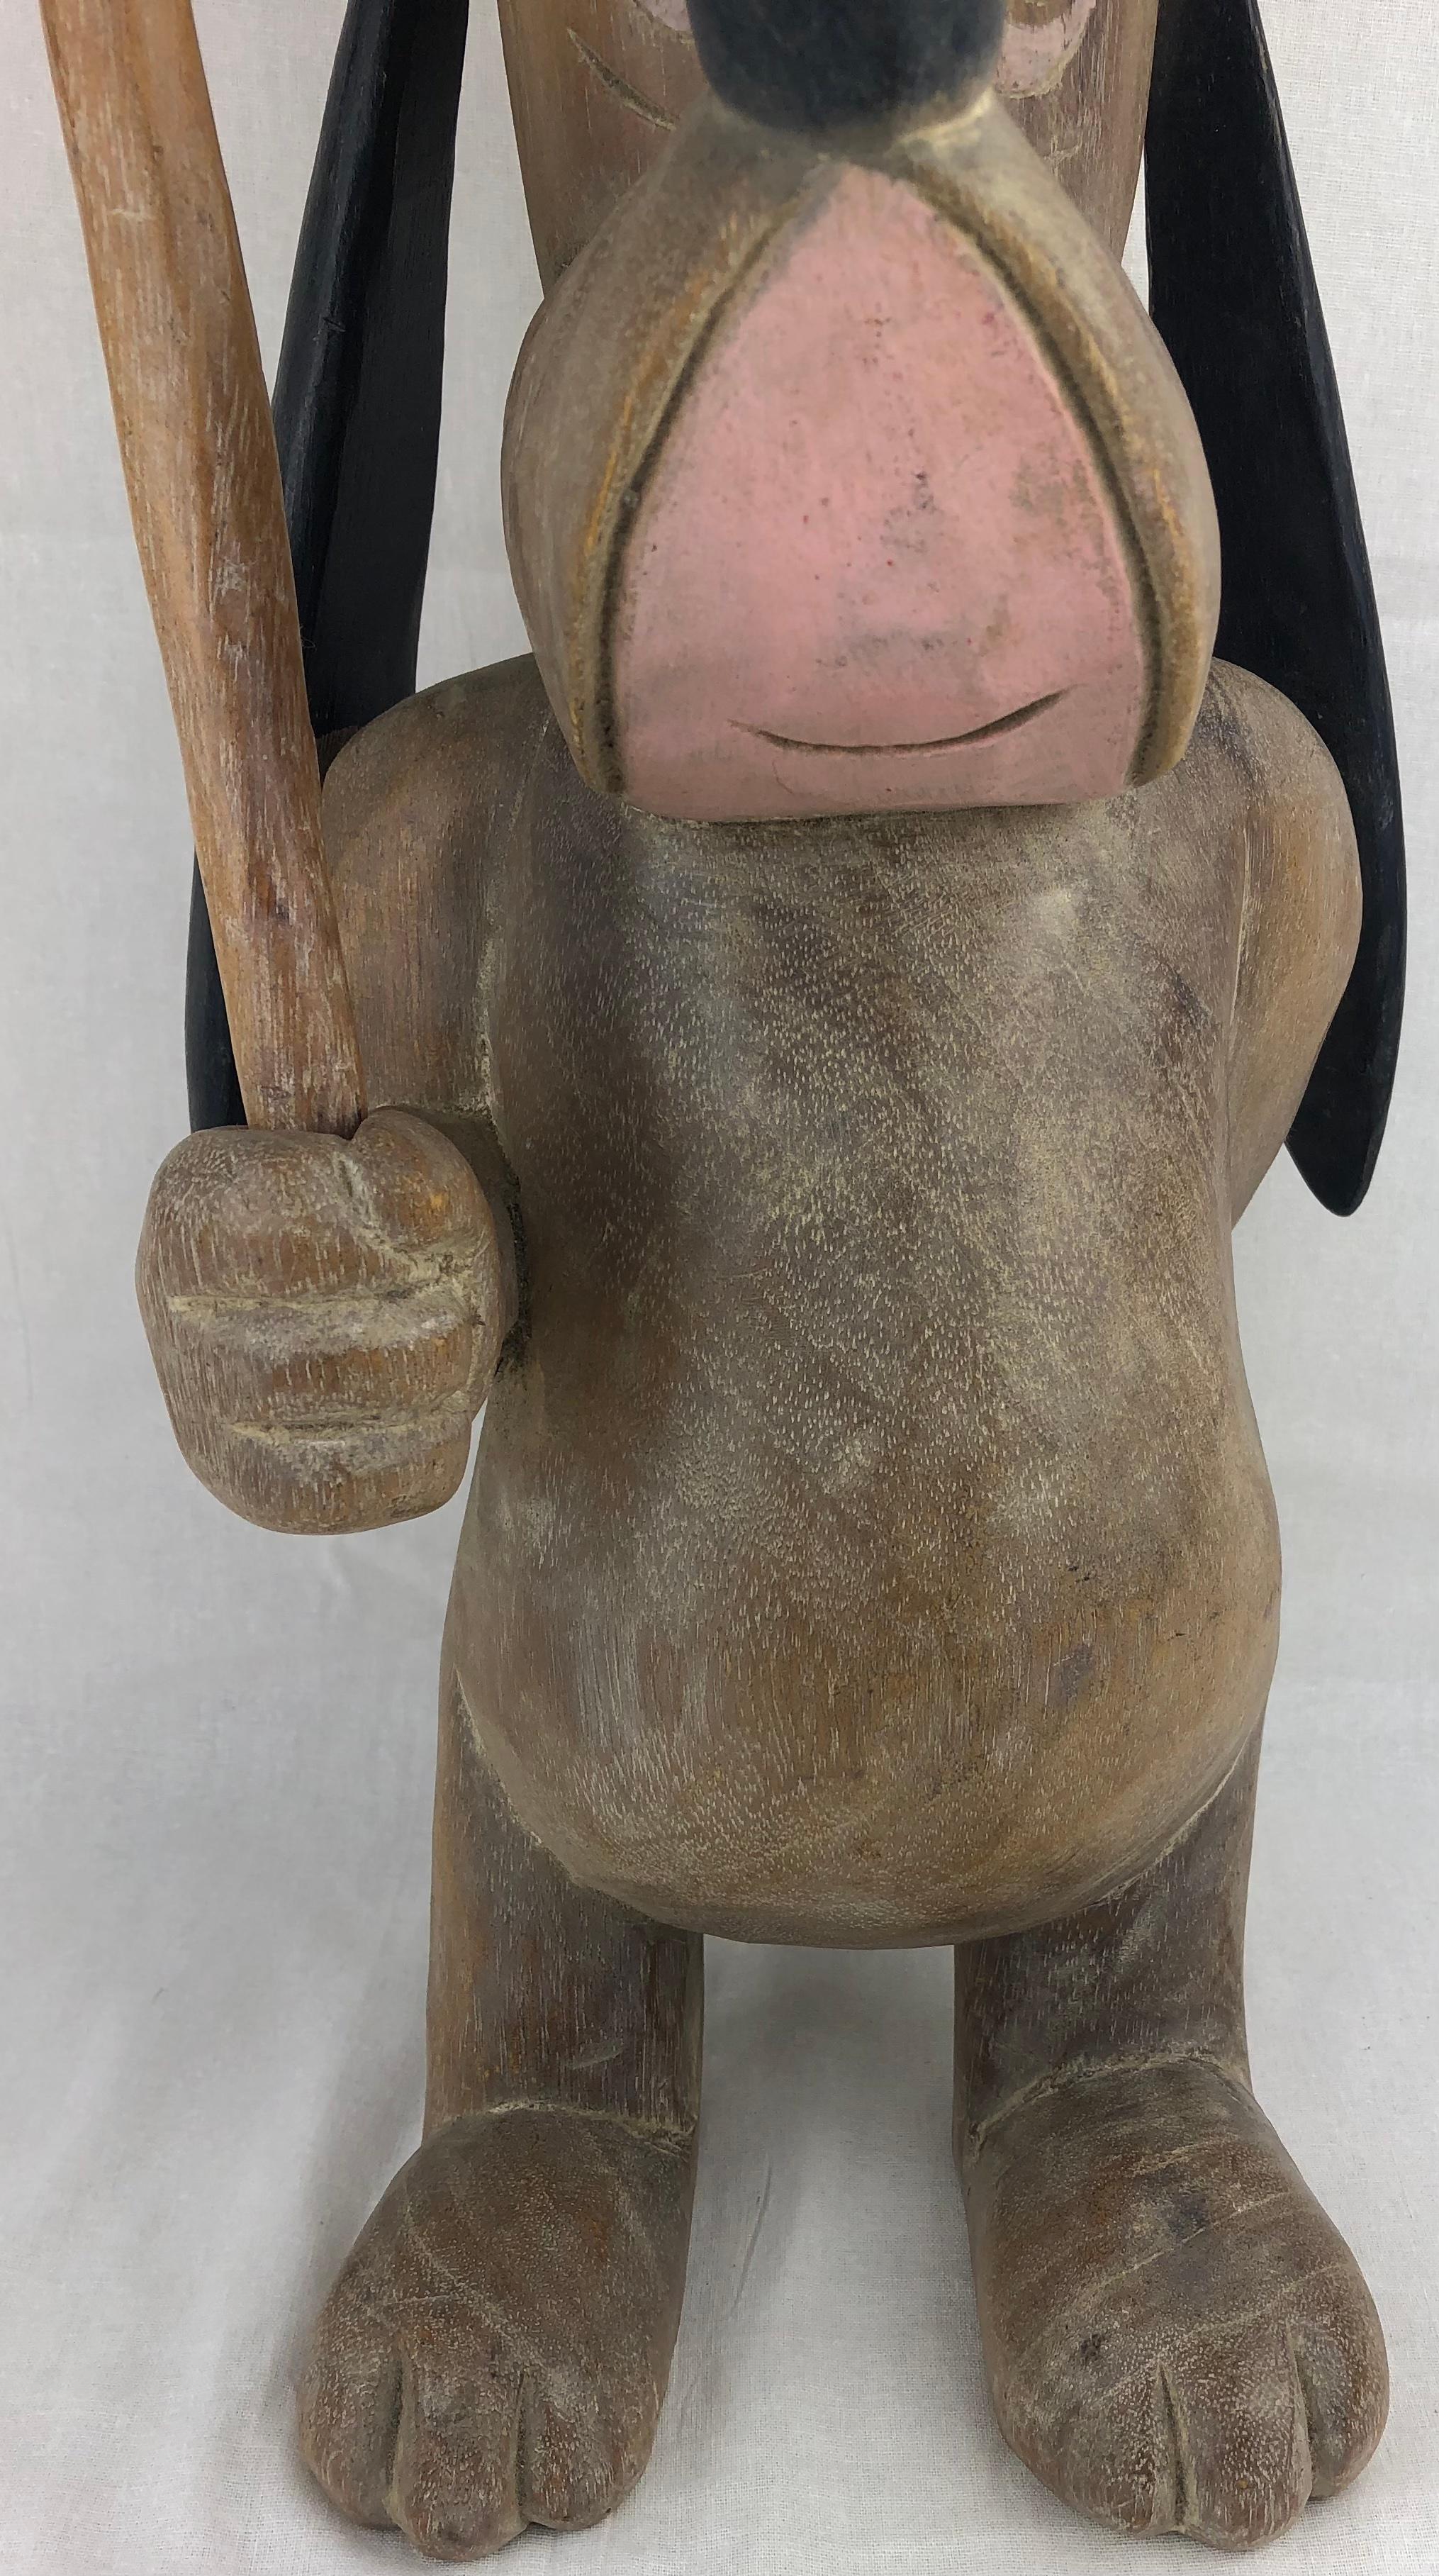 A playful hand-carved and hand-painted wooden sculpture of the Disney dog character, Droopy, holding a sign I'm So Happy. A rare collectable of wood carving circa 1950, unique beauty and fun of this unusual wood Americana.

Measures: 18